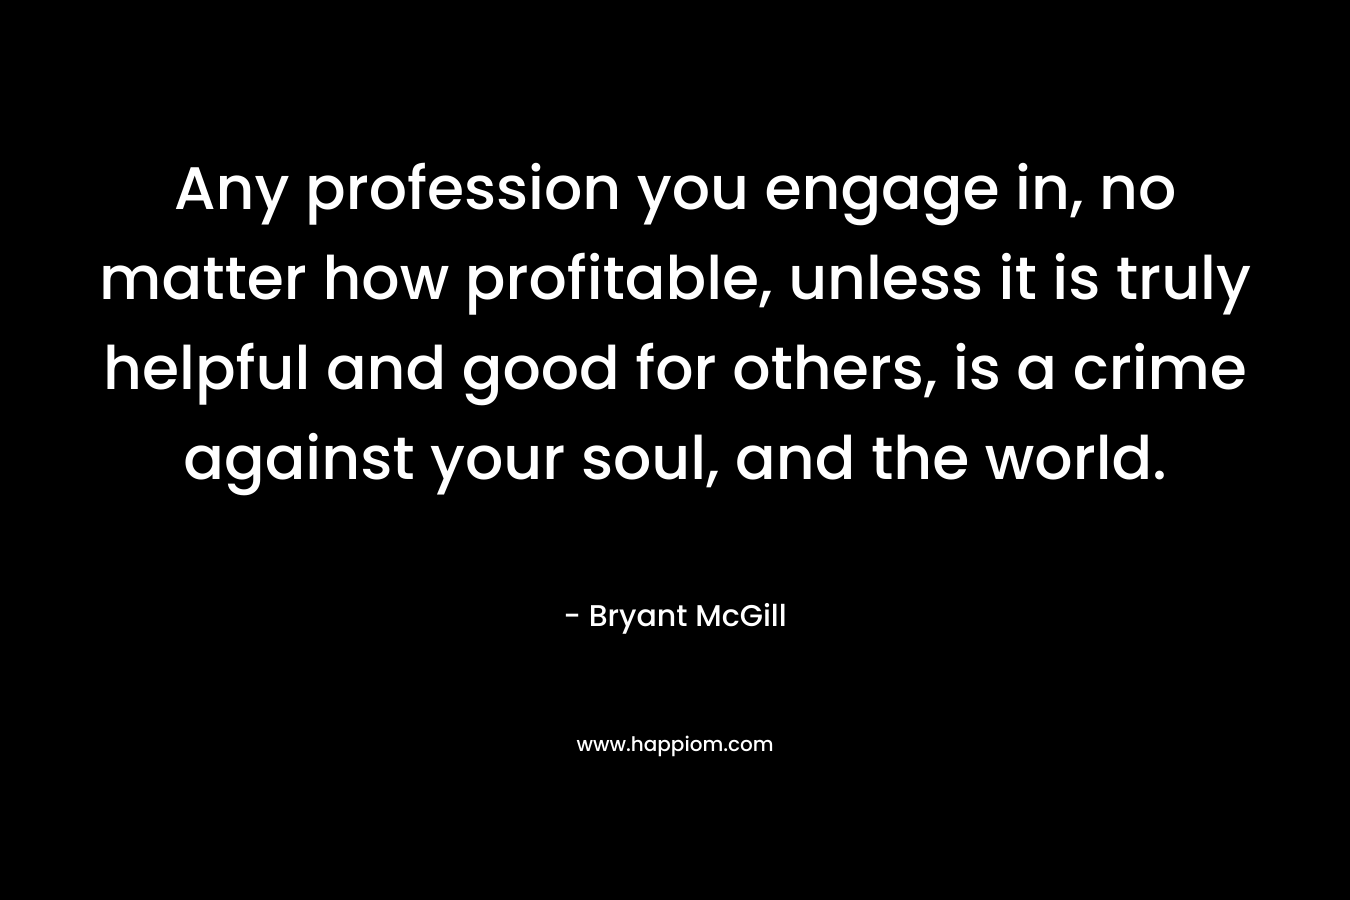 Any profession you engage in, no matter how profitable, unless it is truly helpful and good for others, is a crime against your soul, and the world. – Bryant McGill